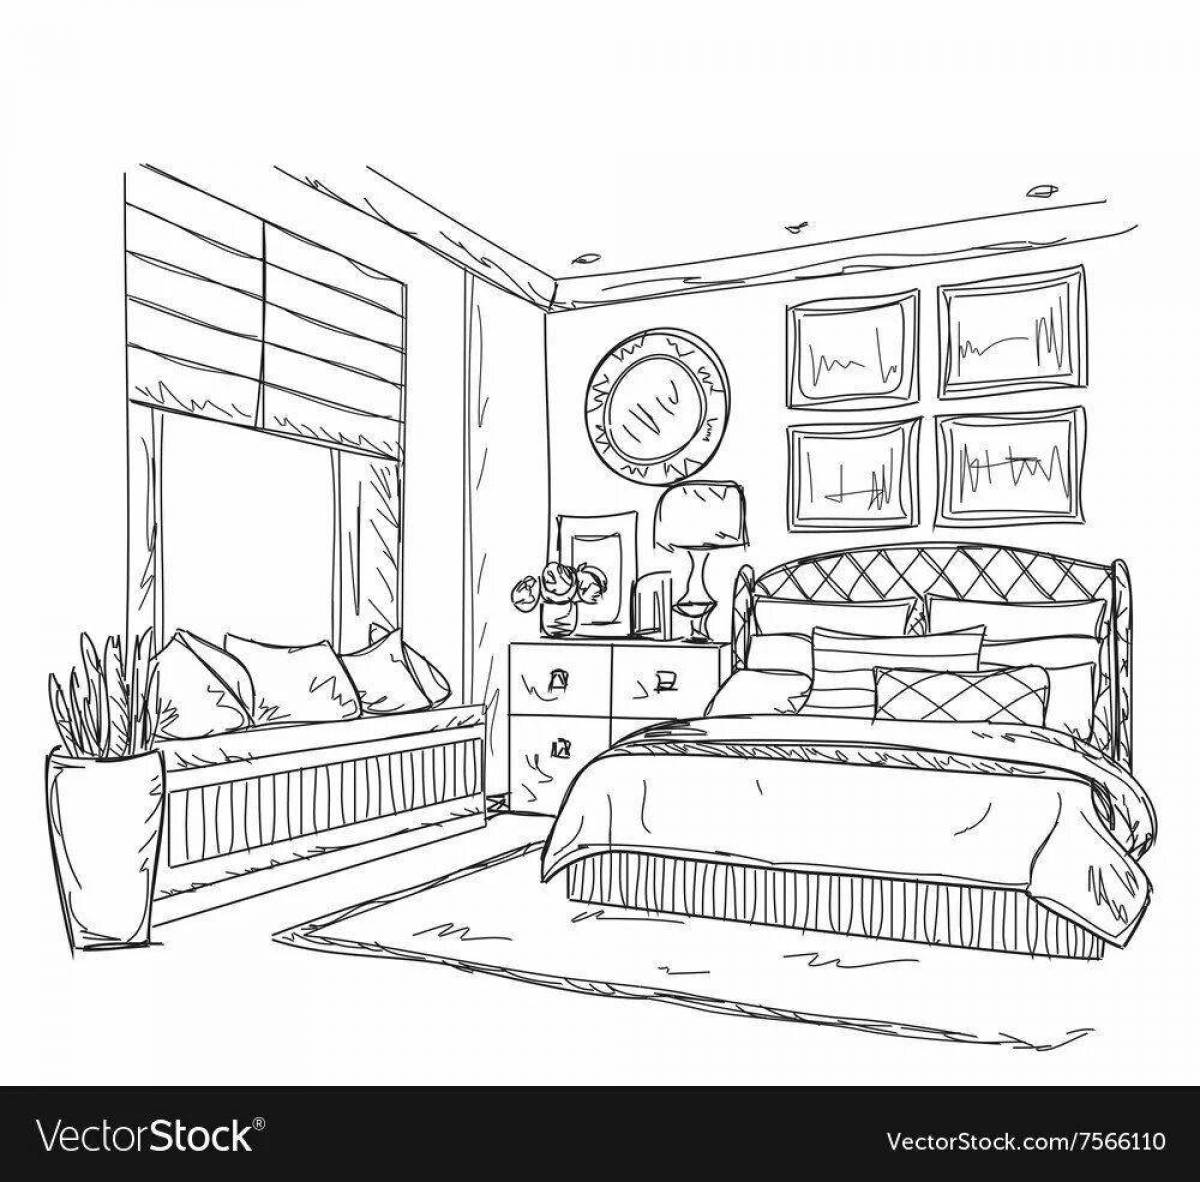 Inviting coloring for bedroom furniture